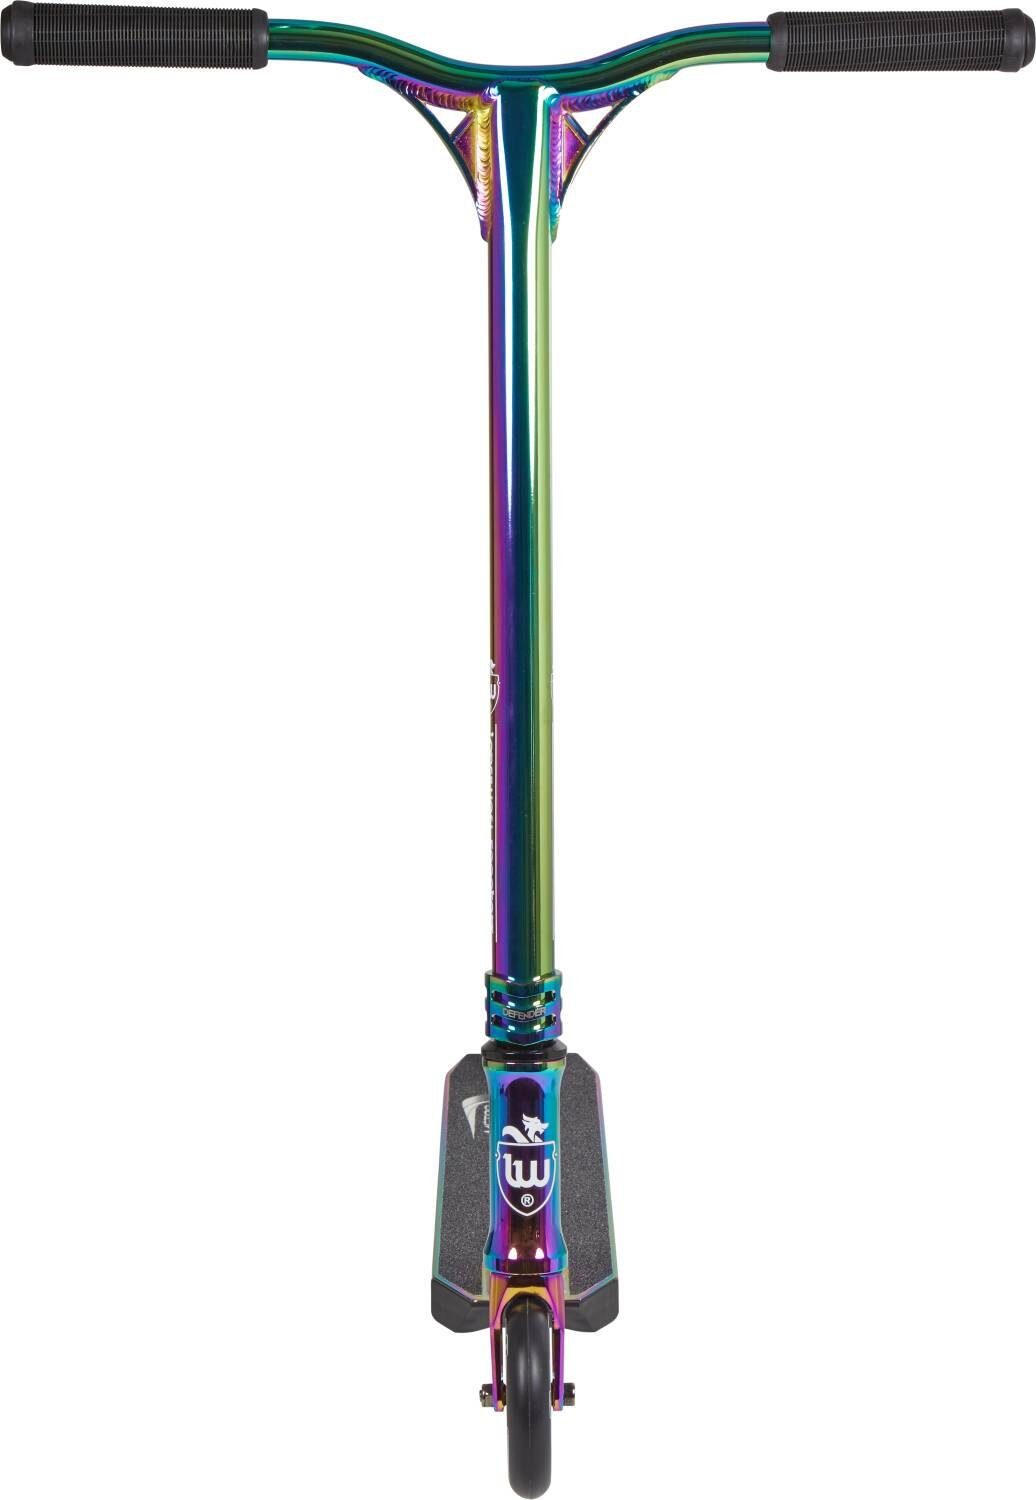 F26 Longway Scooters Metro Stunt-Scooter Longway 2K19 Stuntscooter + Neochrome H=79cm Full Griptape